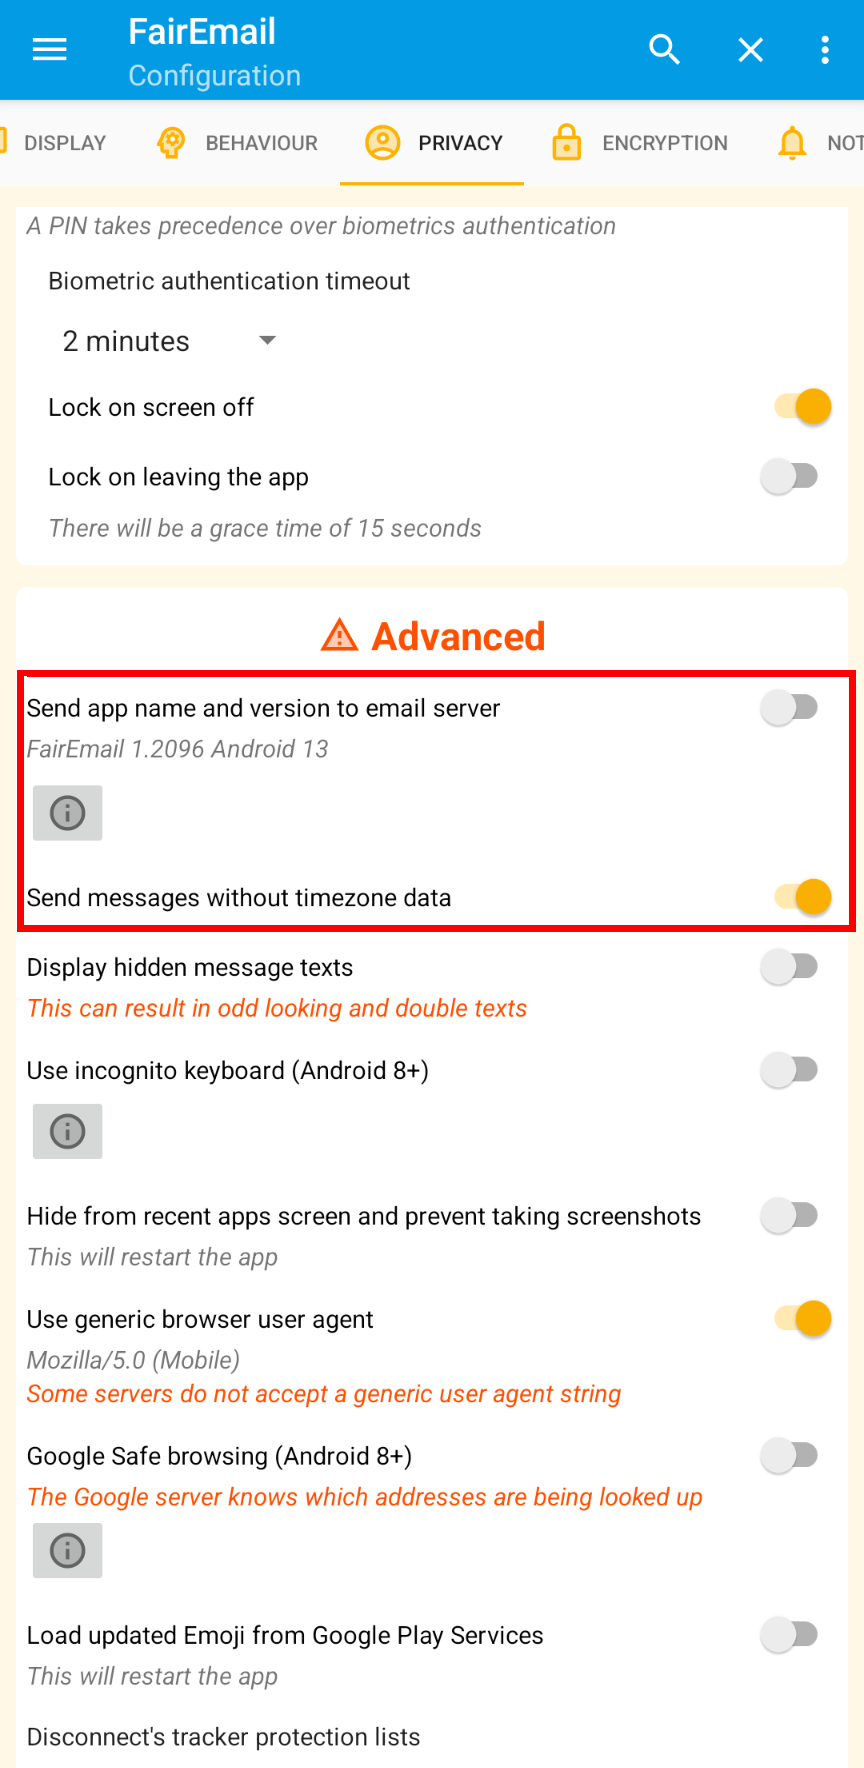 Screenshot of FairEmail Privacy Settings, highlight box around &ldquo;Send app name and version to email server&rdquo; (disabled) and &ldquo;Send messages without timezone data&rdquo; (enabled)